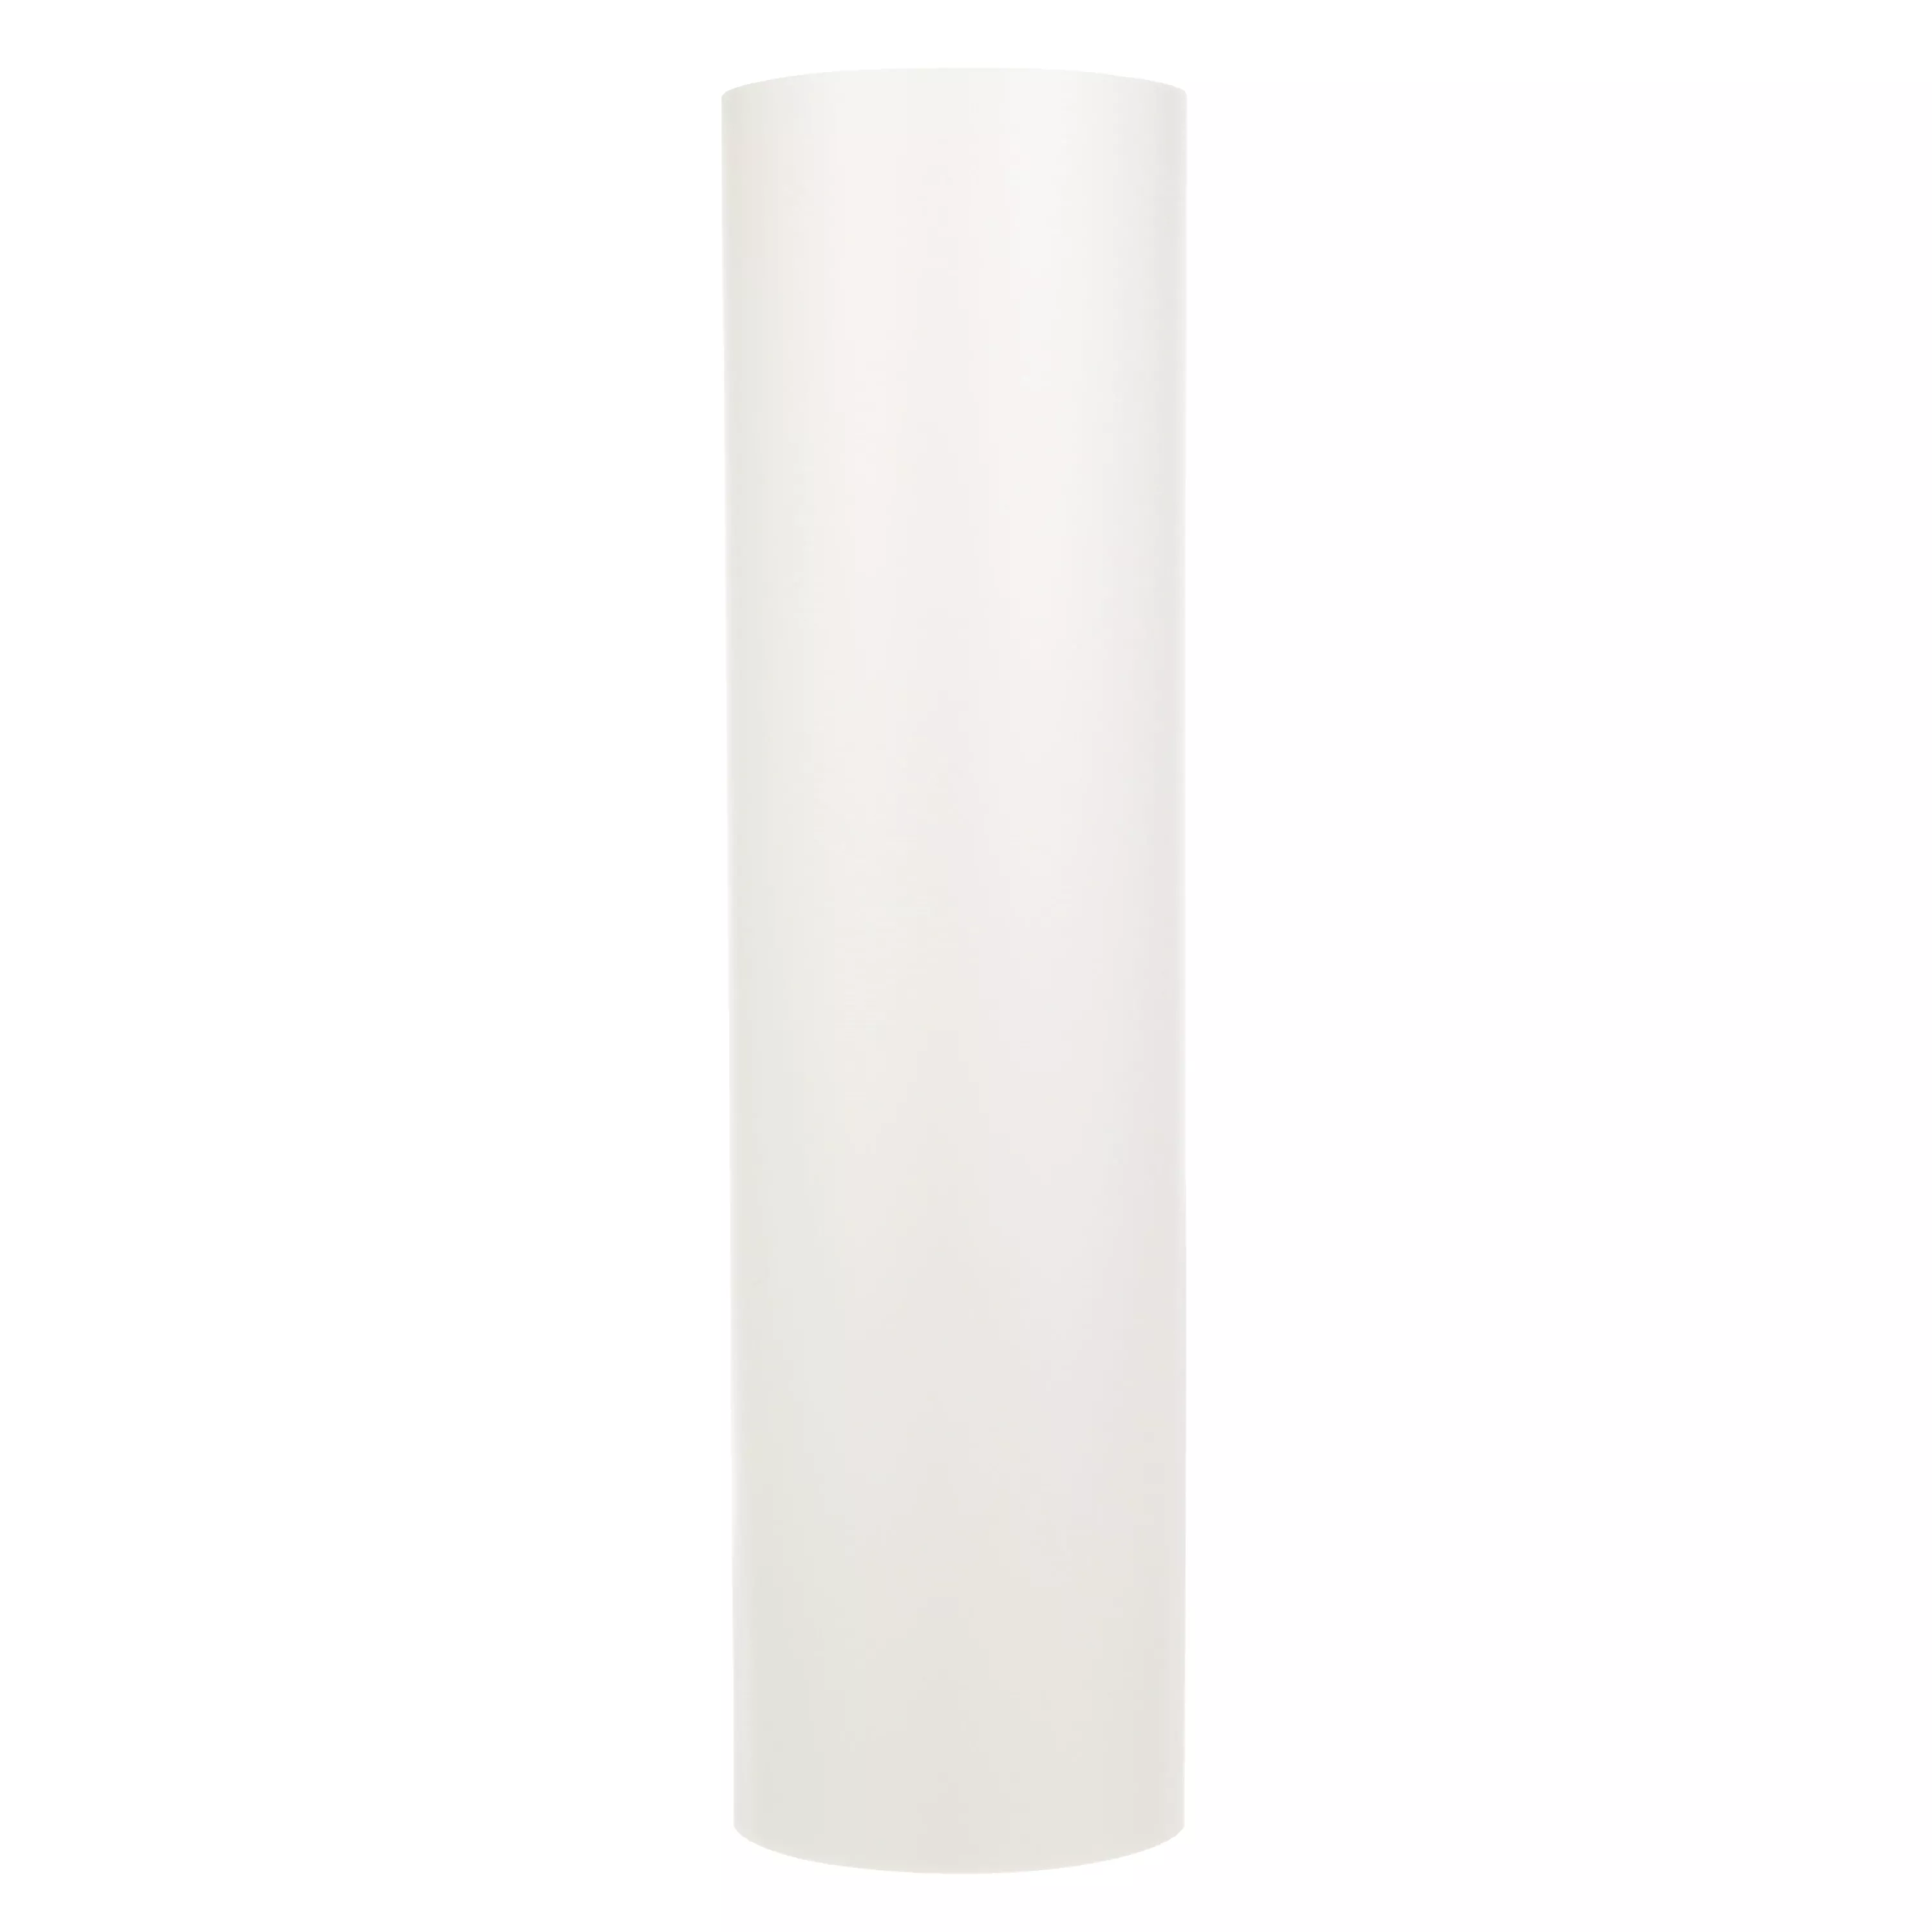 3M™ Silicone Secondary Release Liner 4997, White, 12 in X 180 yd, 4 mil,
1 roll per case